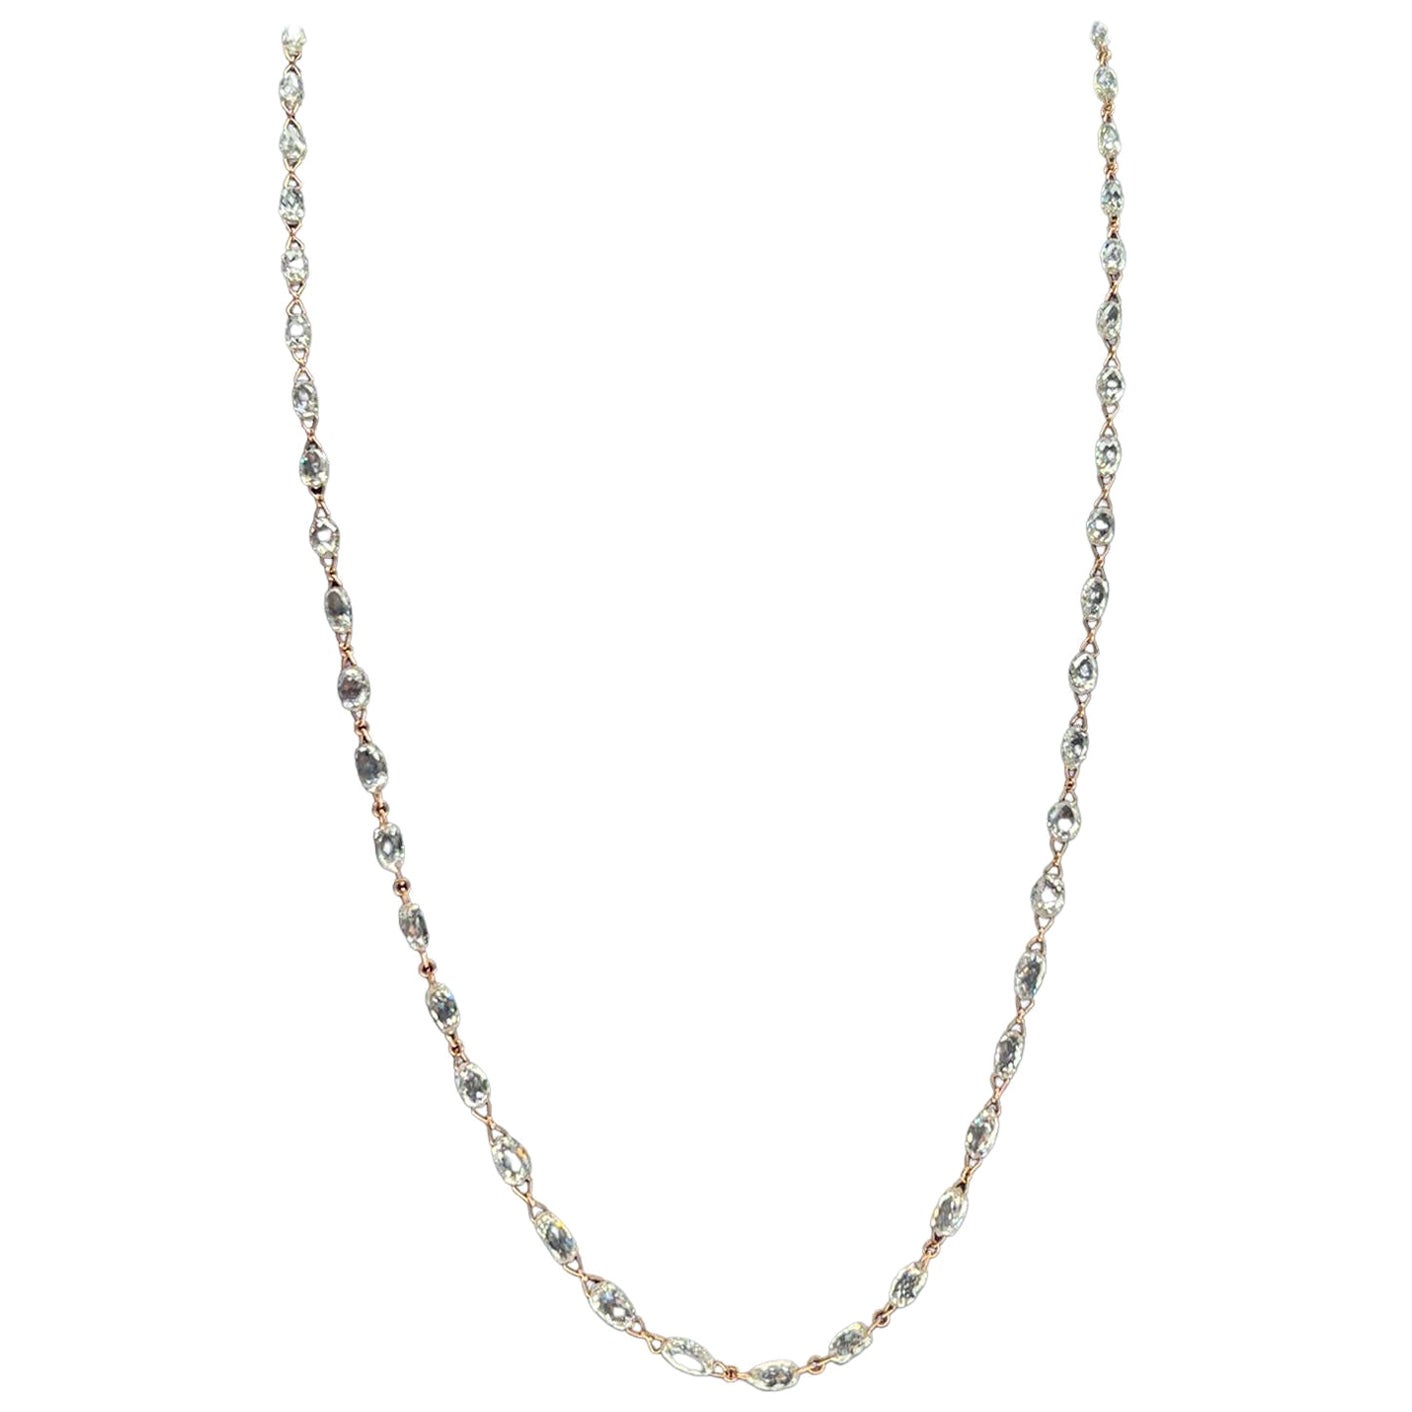 Panim 19.87 Carats Diamond Briolette Chain Necklace in 18k Yellow Gold